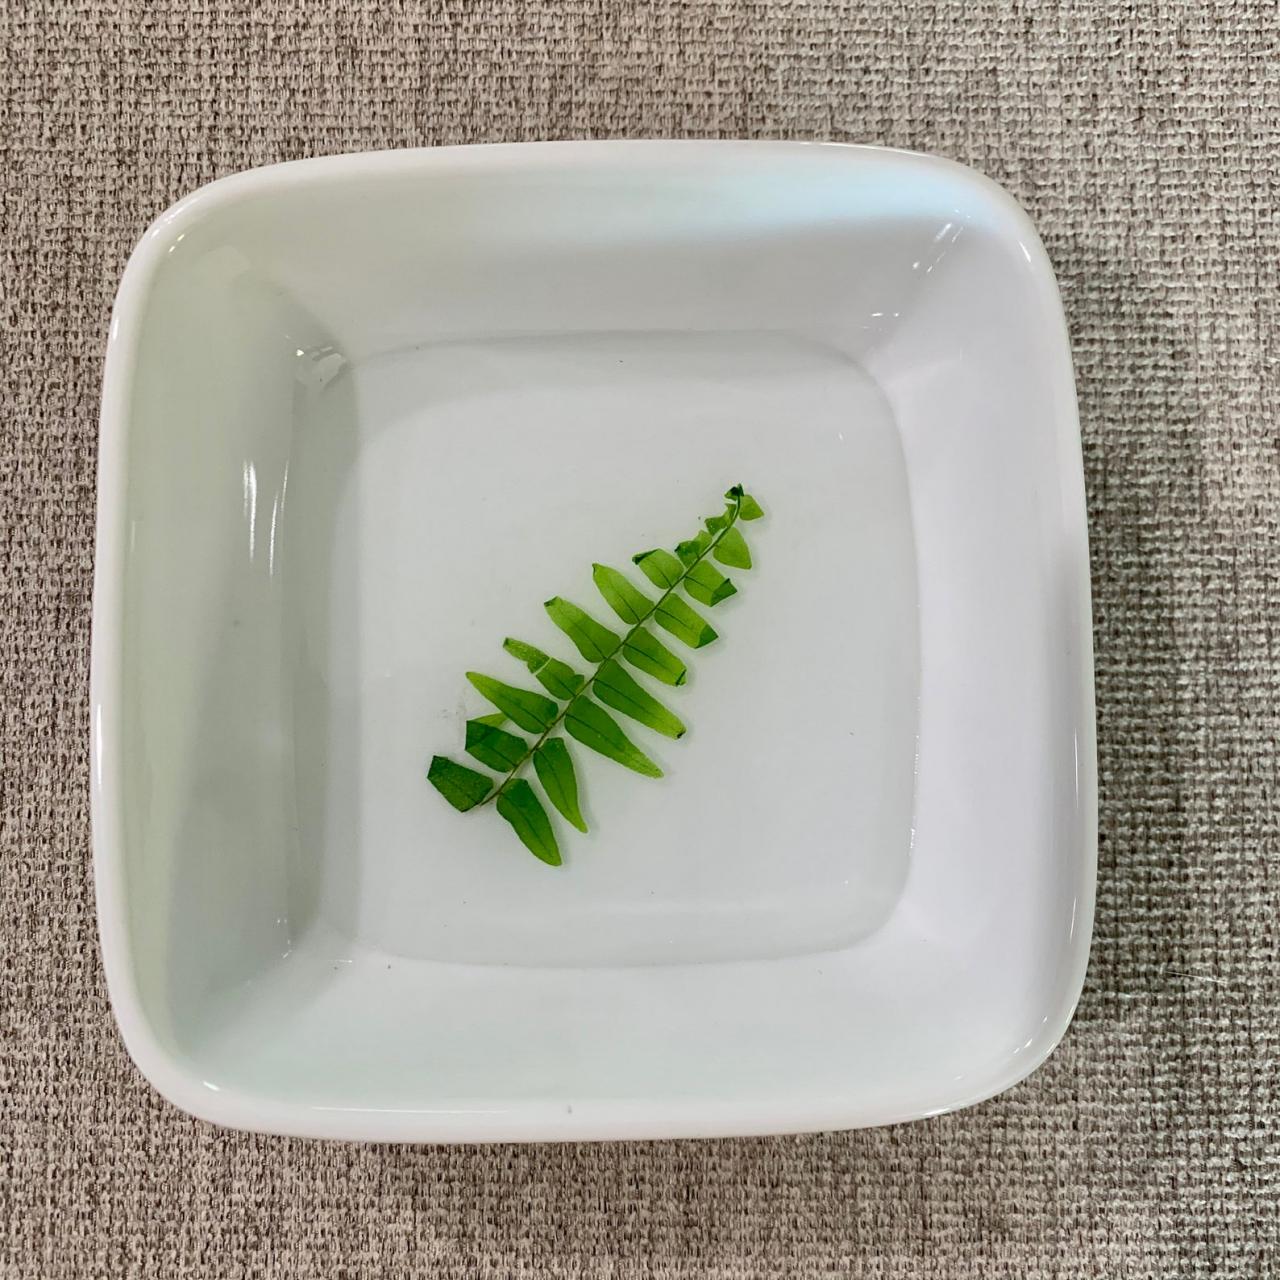 Pressed Fern trinket bowl/tray,botanical,fern ring dish, gift for special occasion,home warming gift,home decor,resin art,small bowl,gift